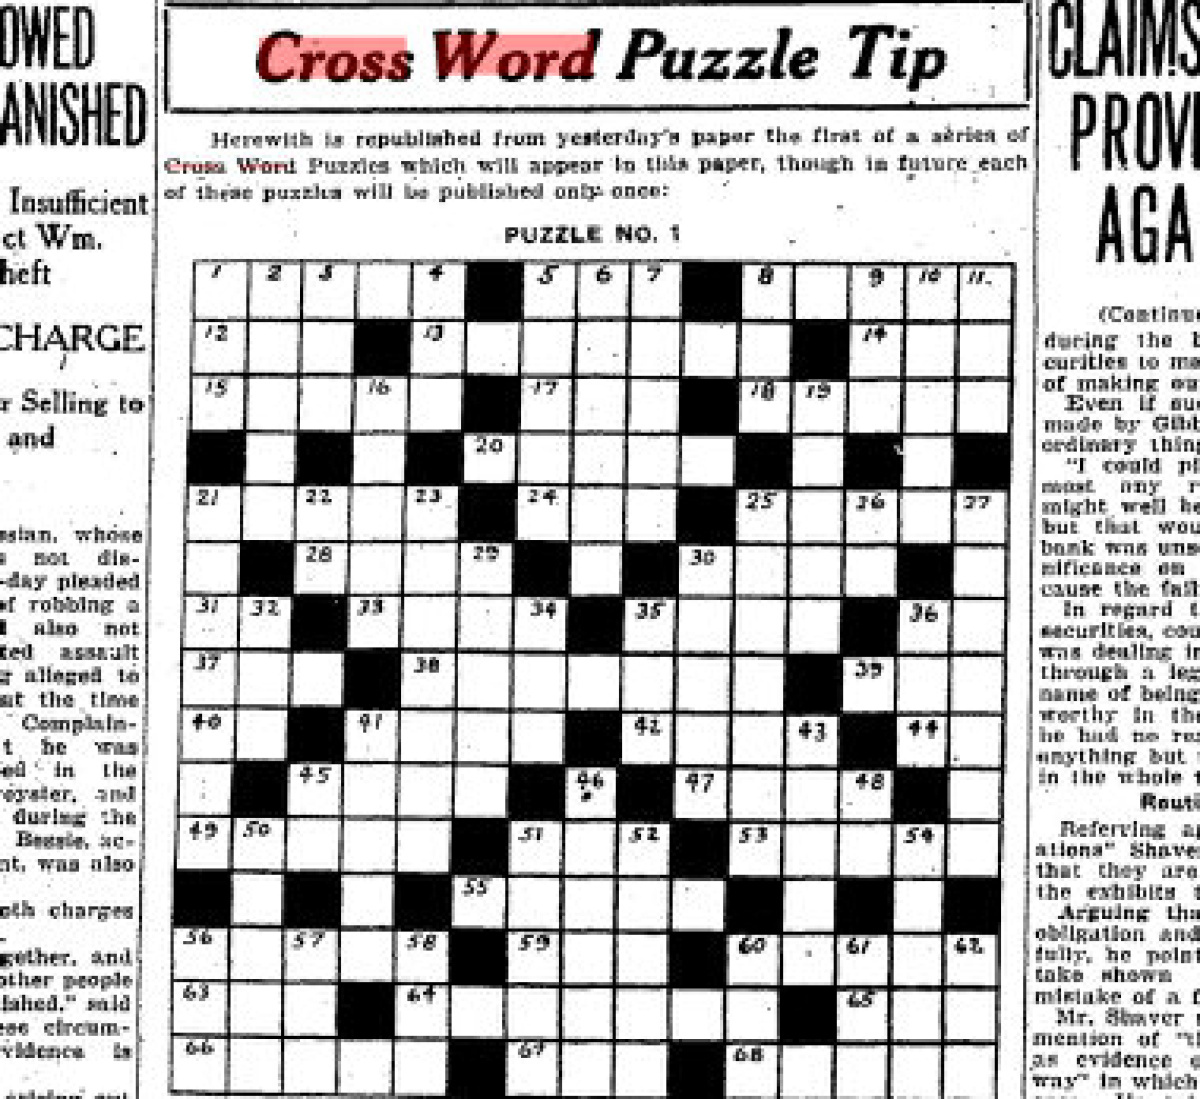 Can You Solve The Star s First Ever Crossword Puzzle From 1924 